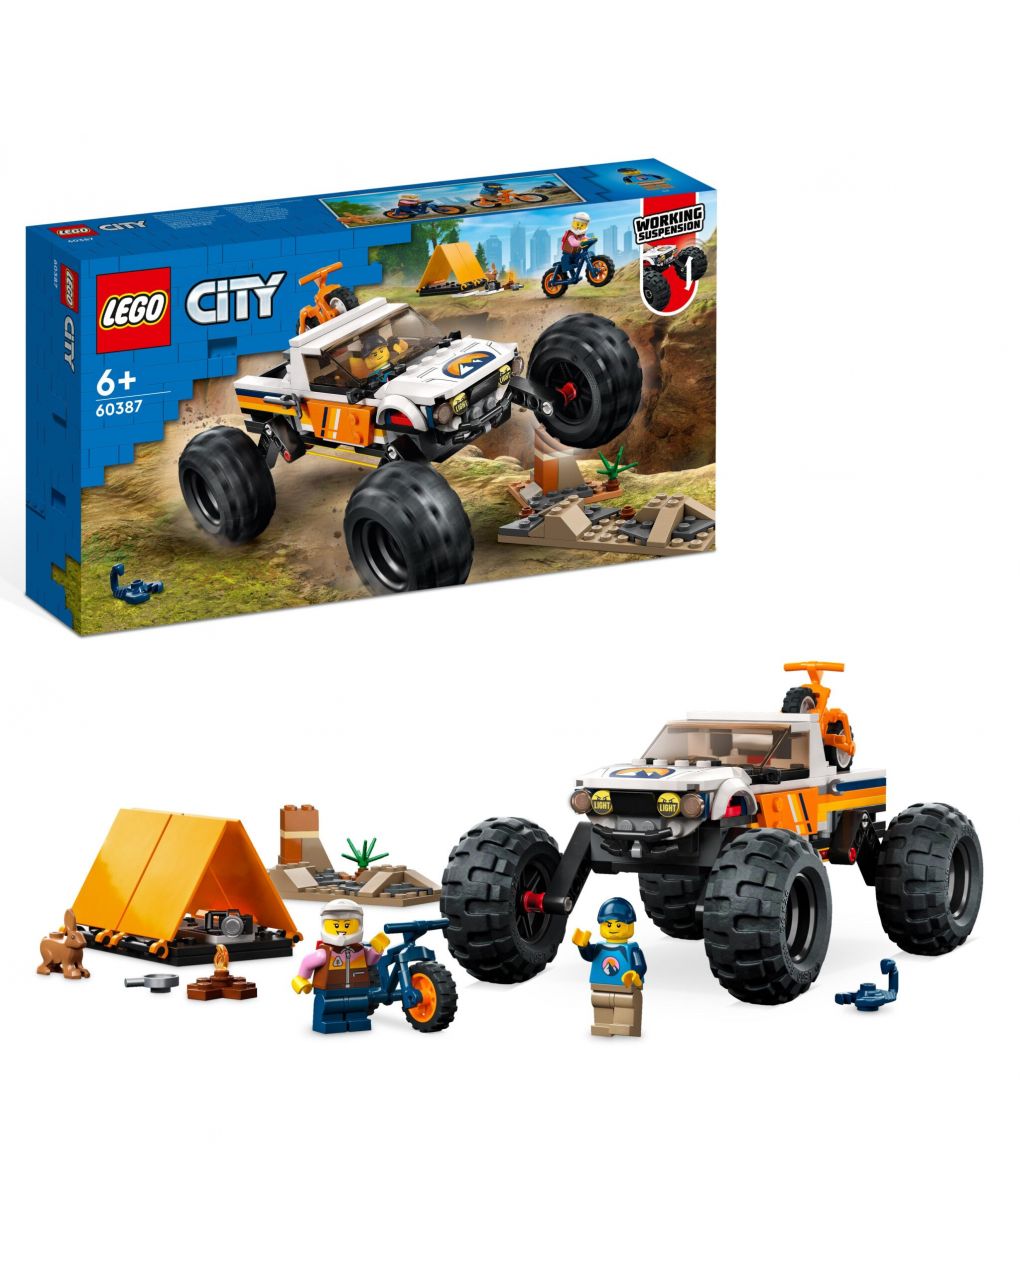 Lego city great vehicles 4x4 off-roader adventures 60387 - Lego, Lego City, Lego City Great Vehicles